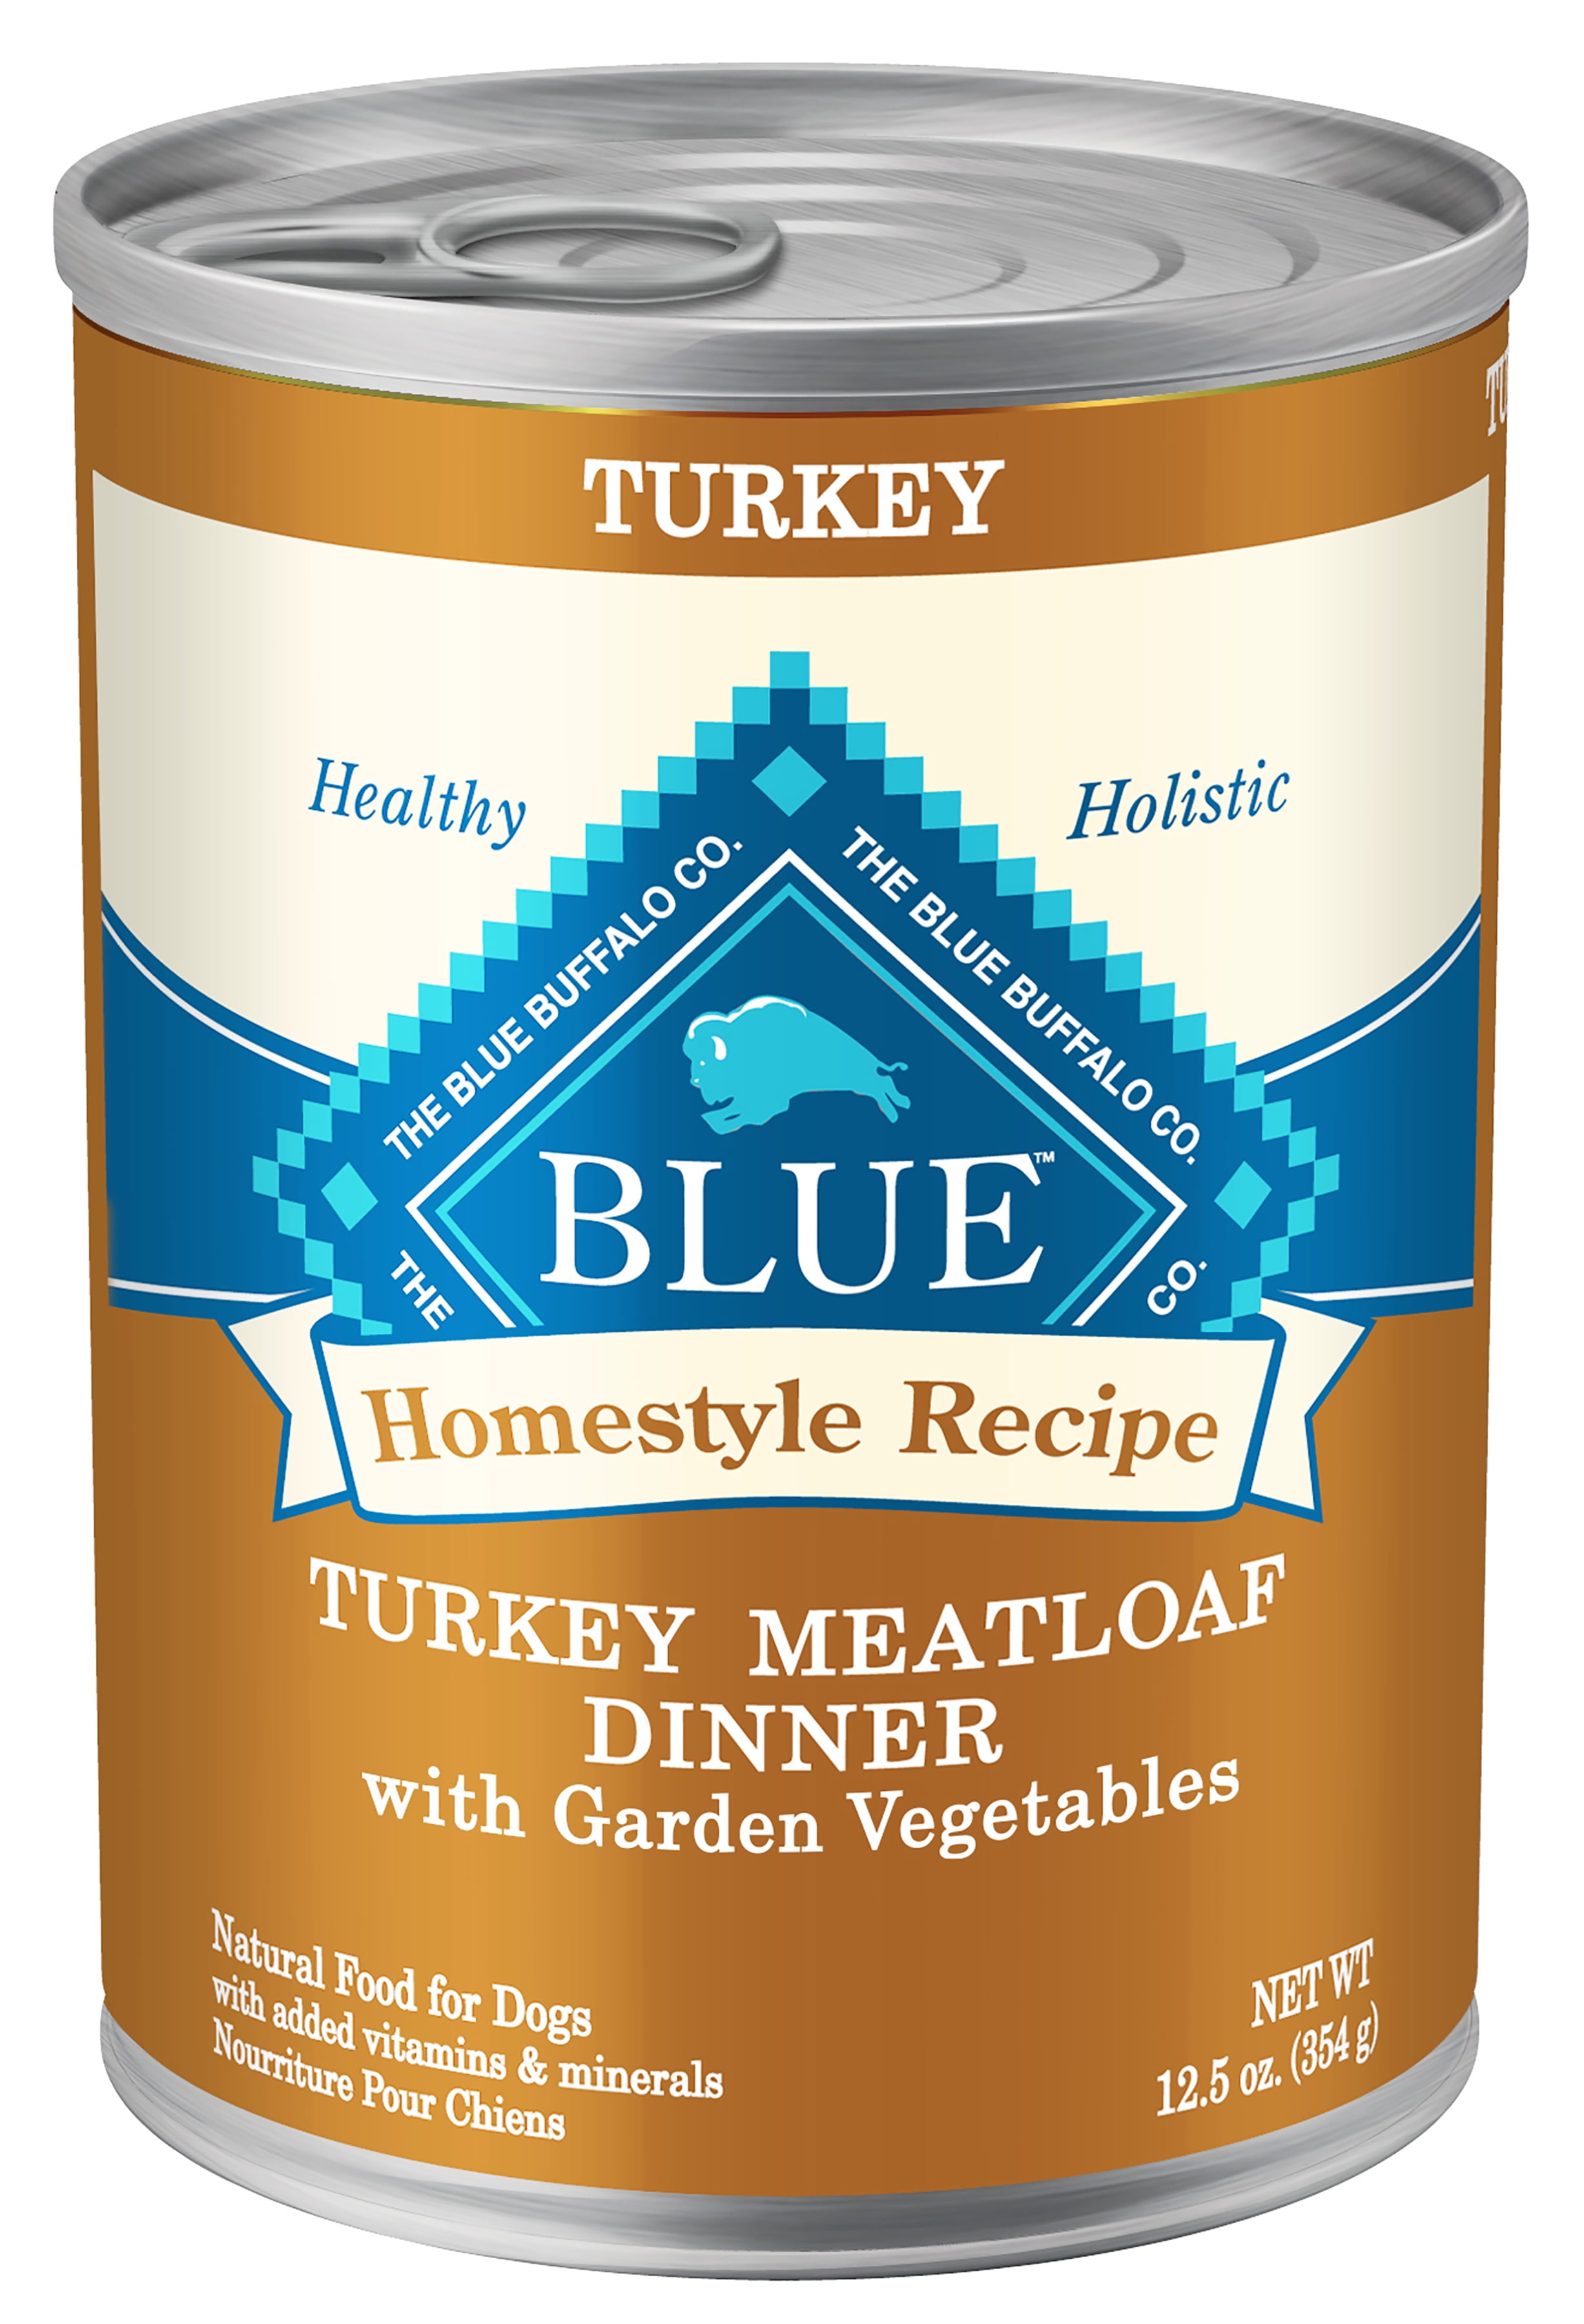 Blue Buffalo Homestyle Recipe Turkey Pate Wet Dog Food for Adult Dogs, Whole Grain, 12.5 oz. Can